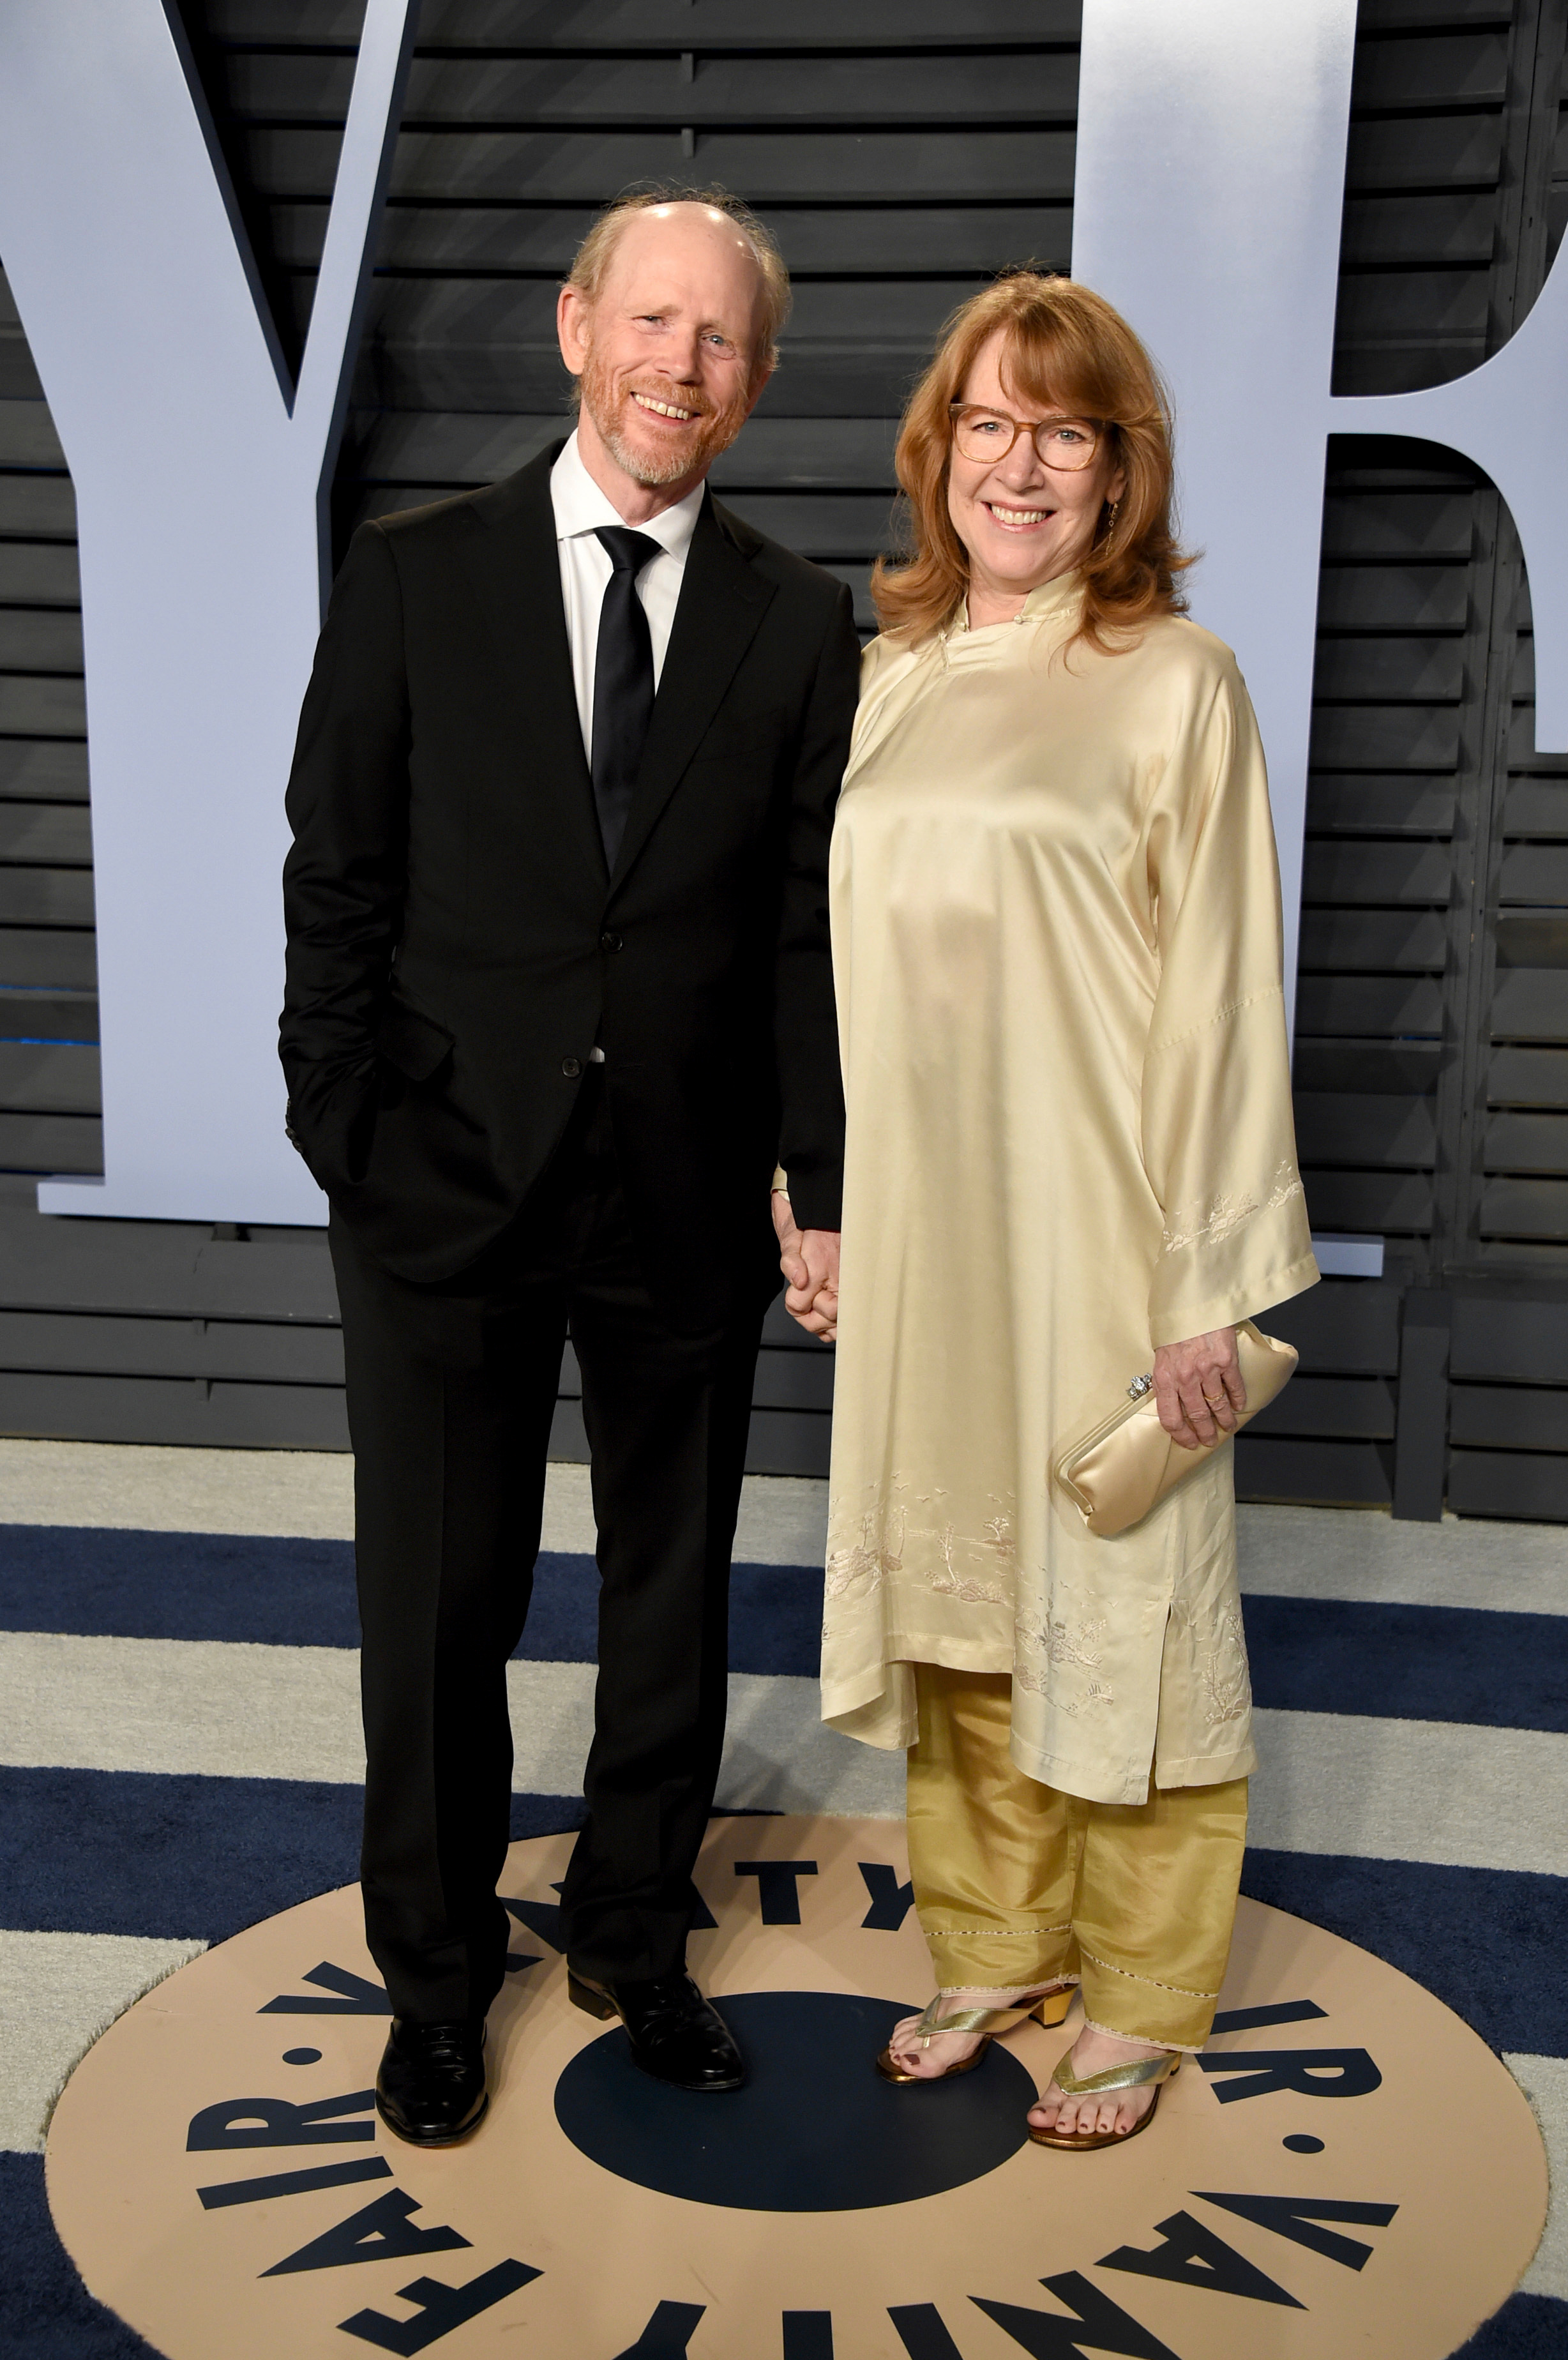 Ron Howard's Kids: Meet Children and Family With Wife Cheryl